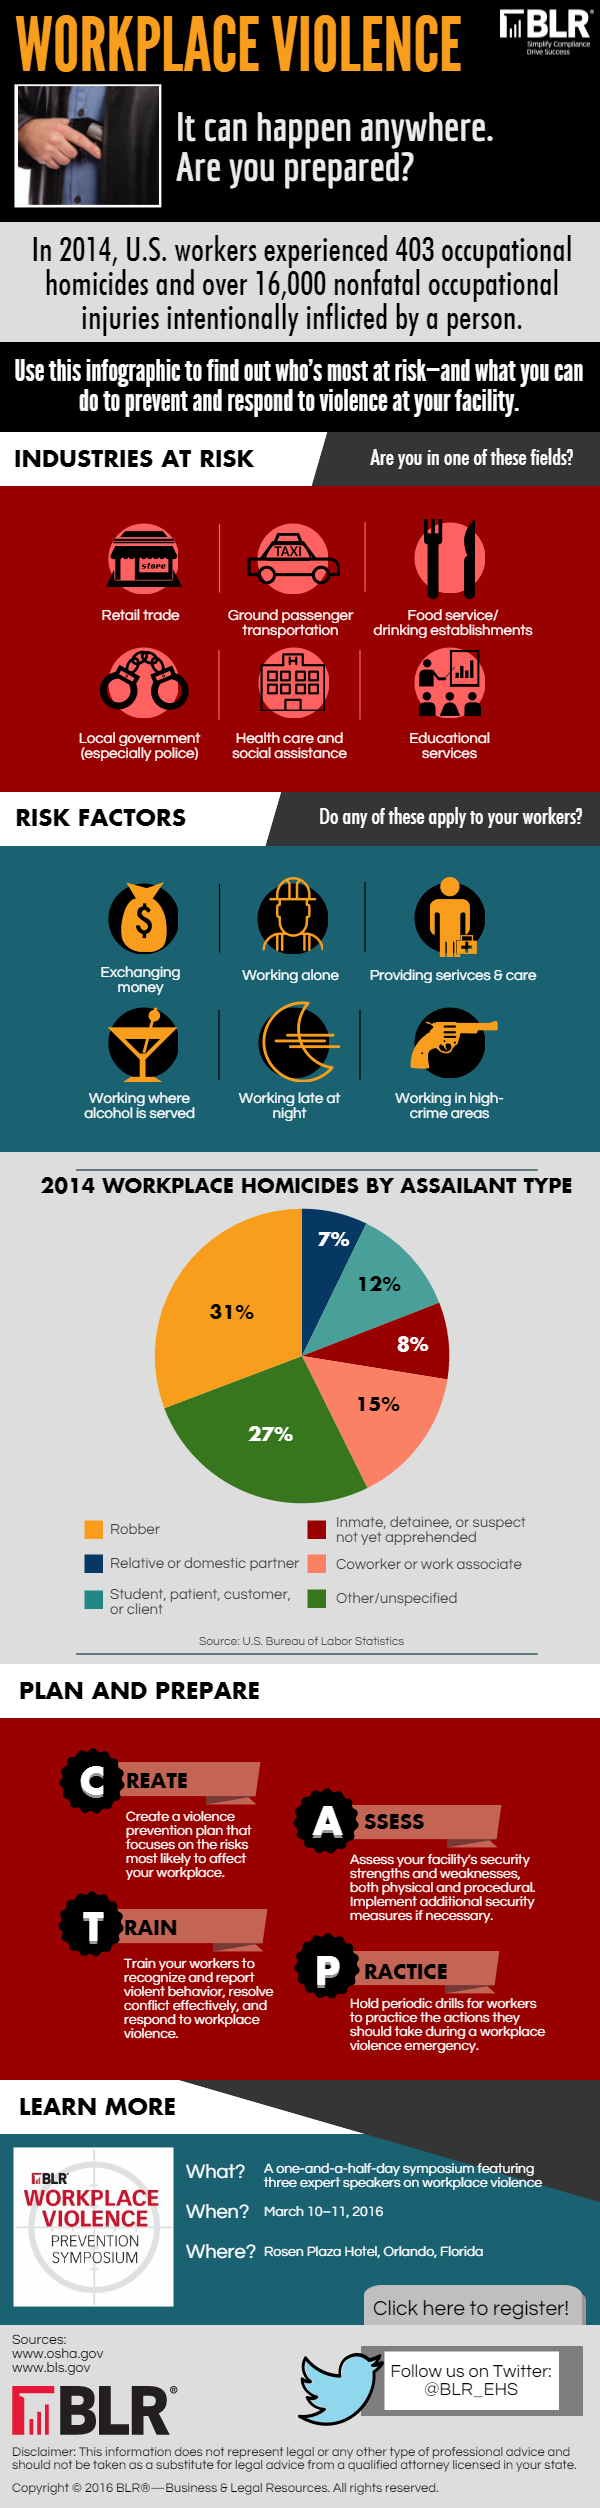 Infographic Workplace Violence Prevention HR Daily Advisor